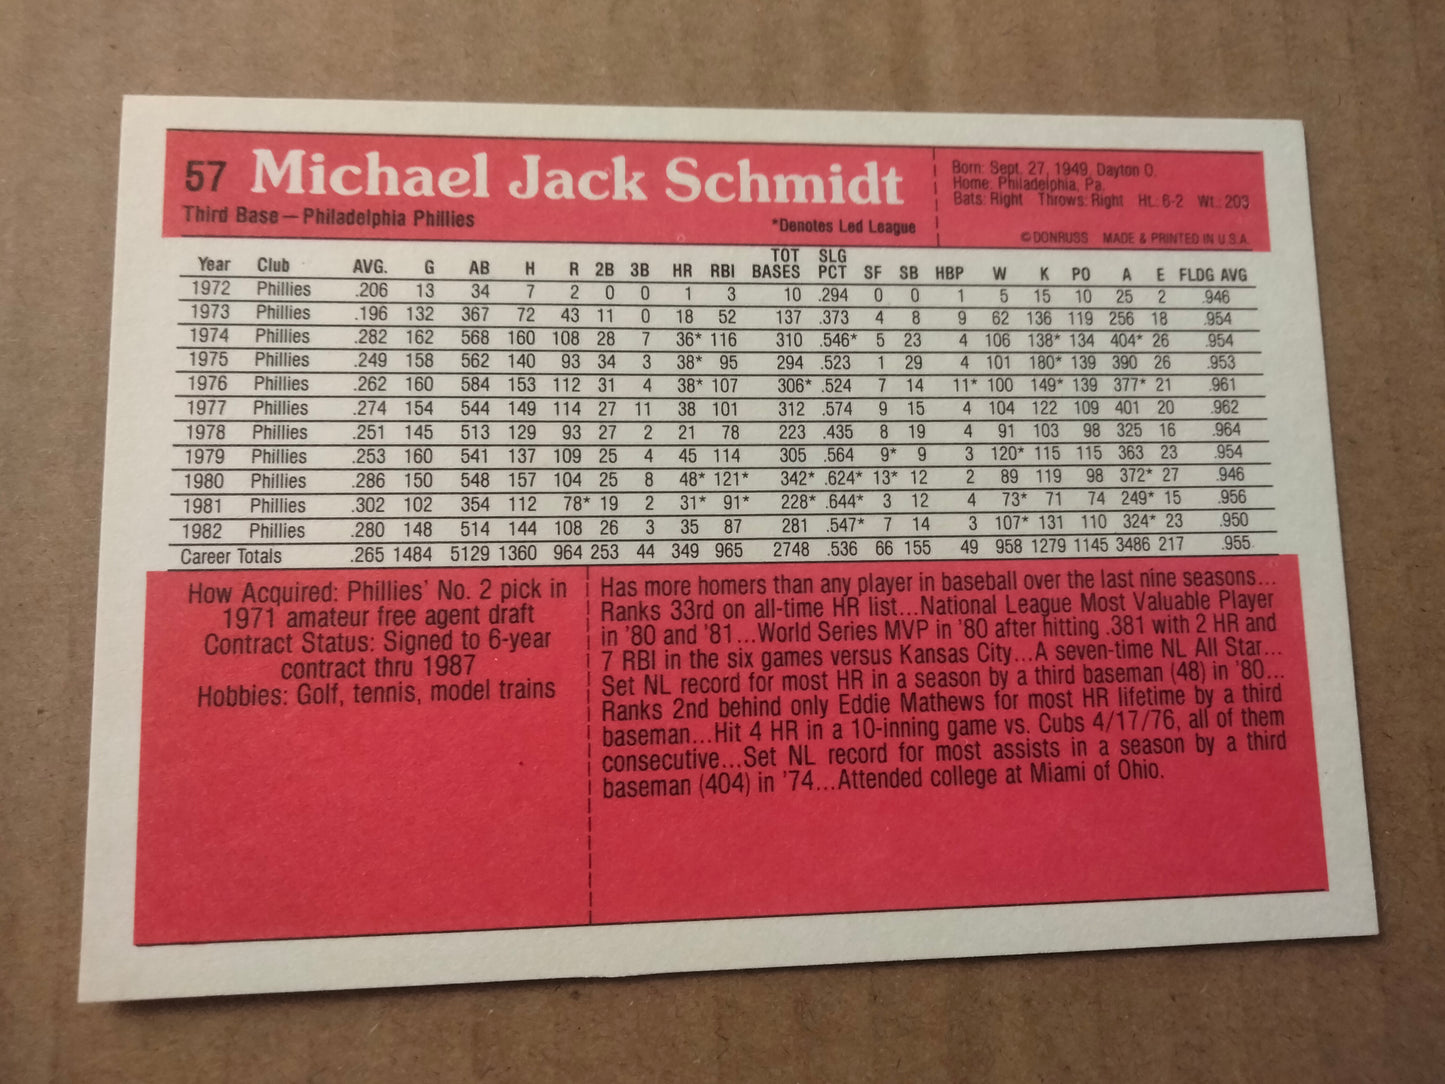 1983 Donruss Action All-Stars Mike Schmidt Champion 3.5" x 5" Enlarged Players Card #57 Phillies